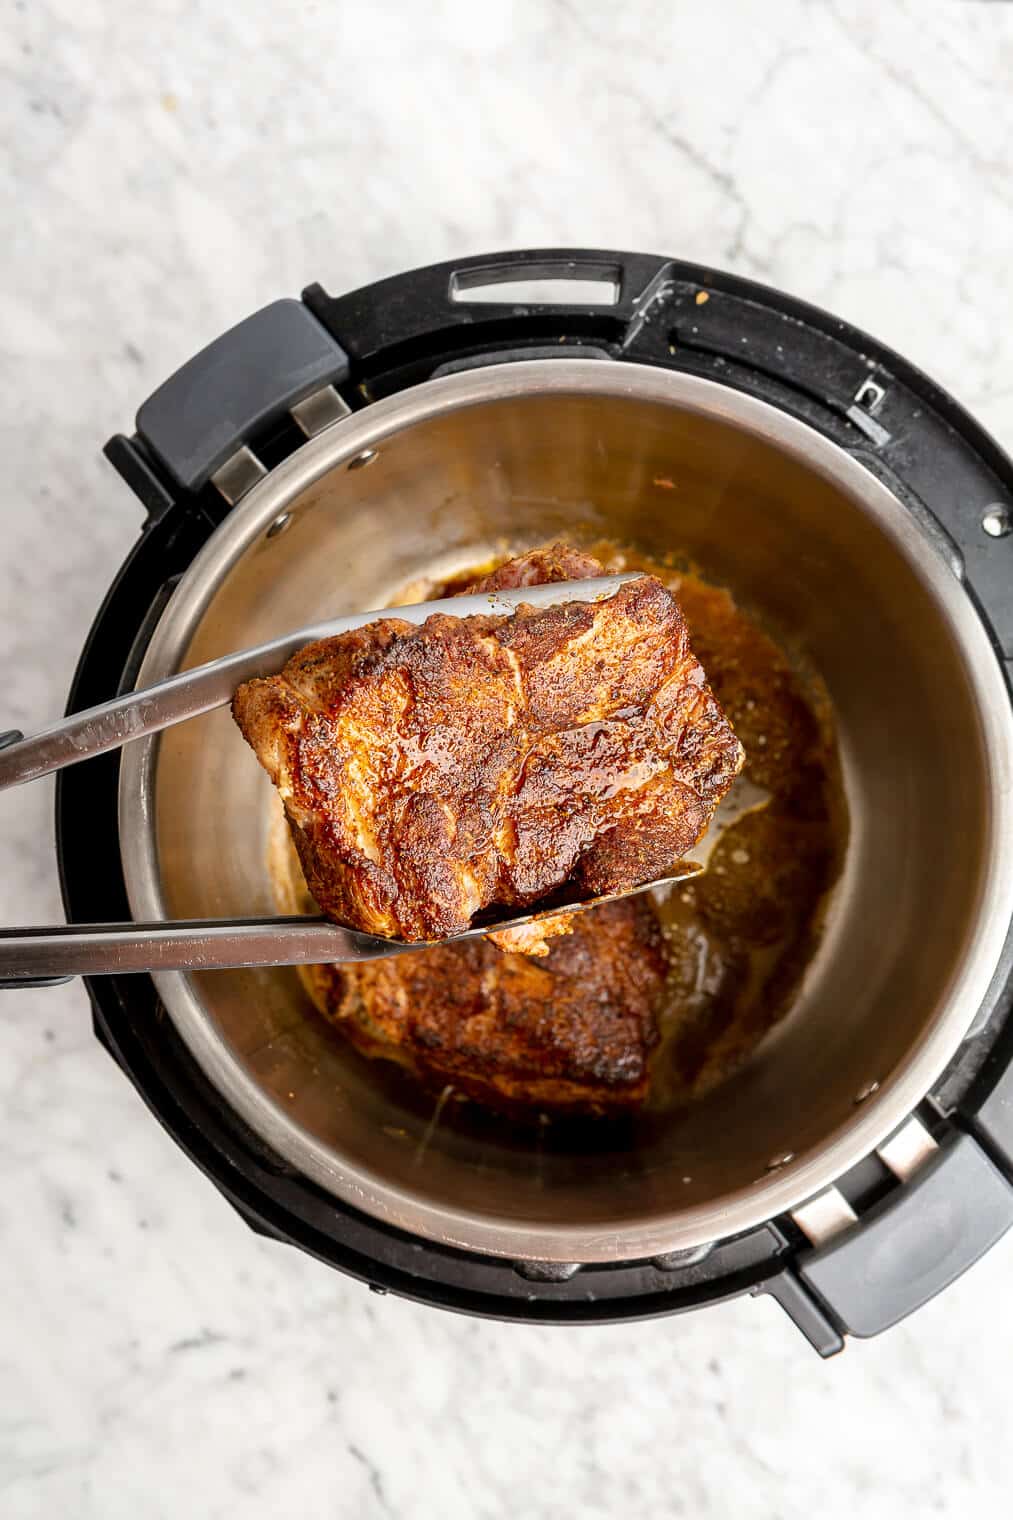 Pork shoulder that has been seared in an instant pot.